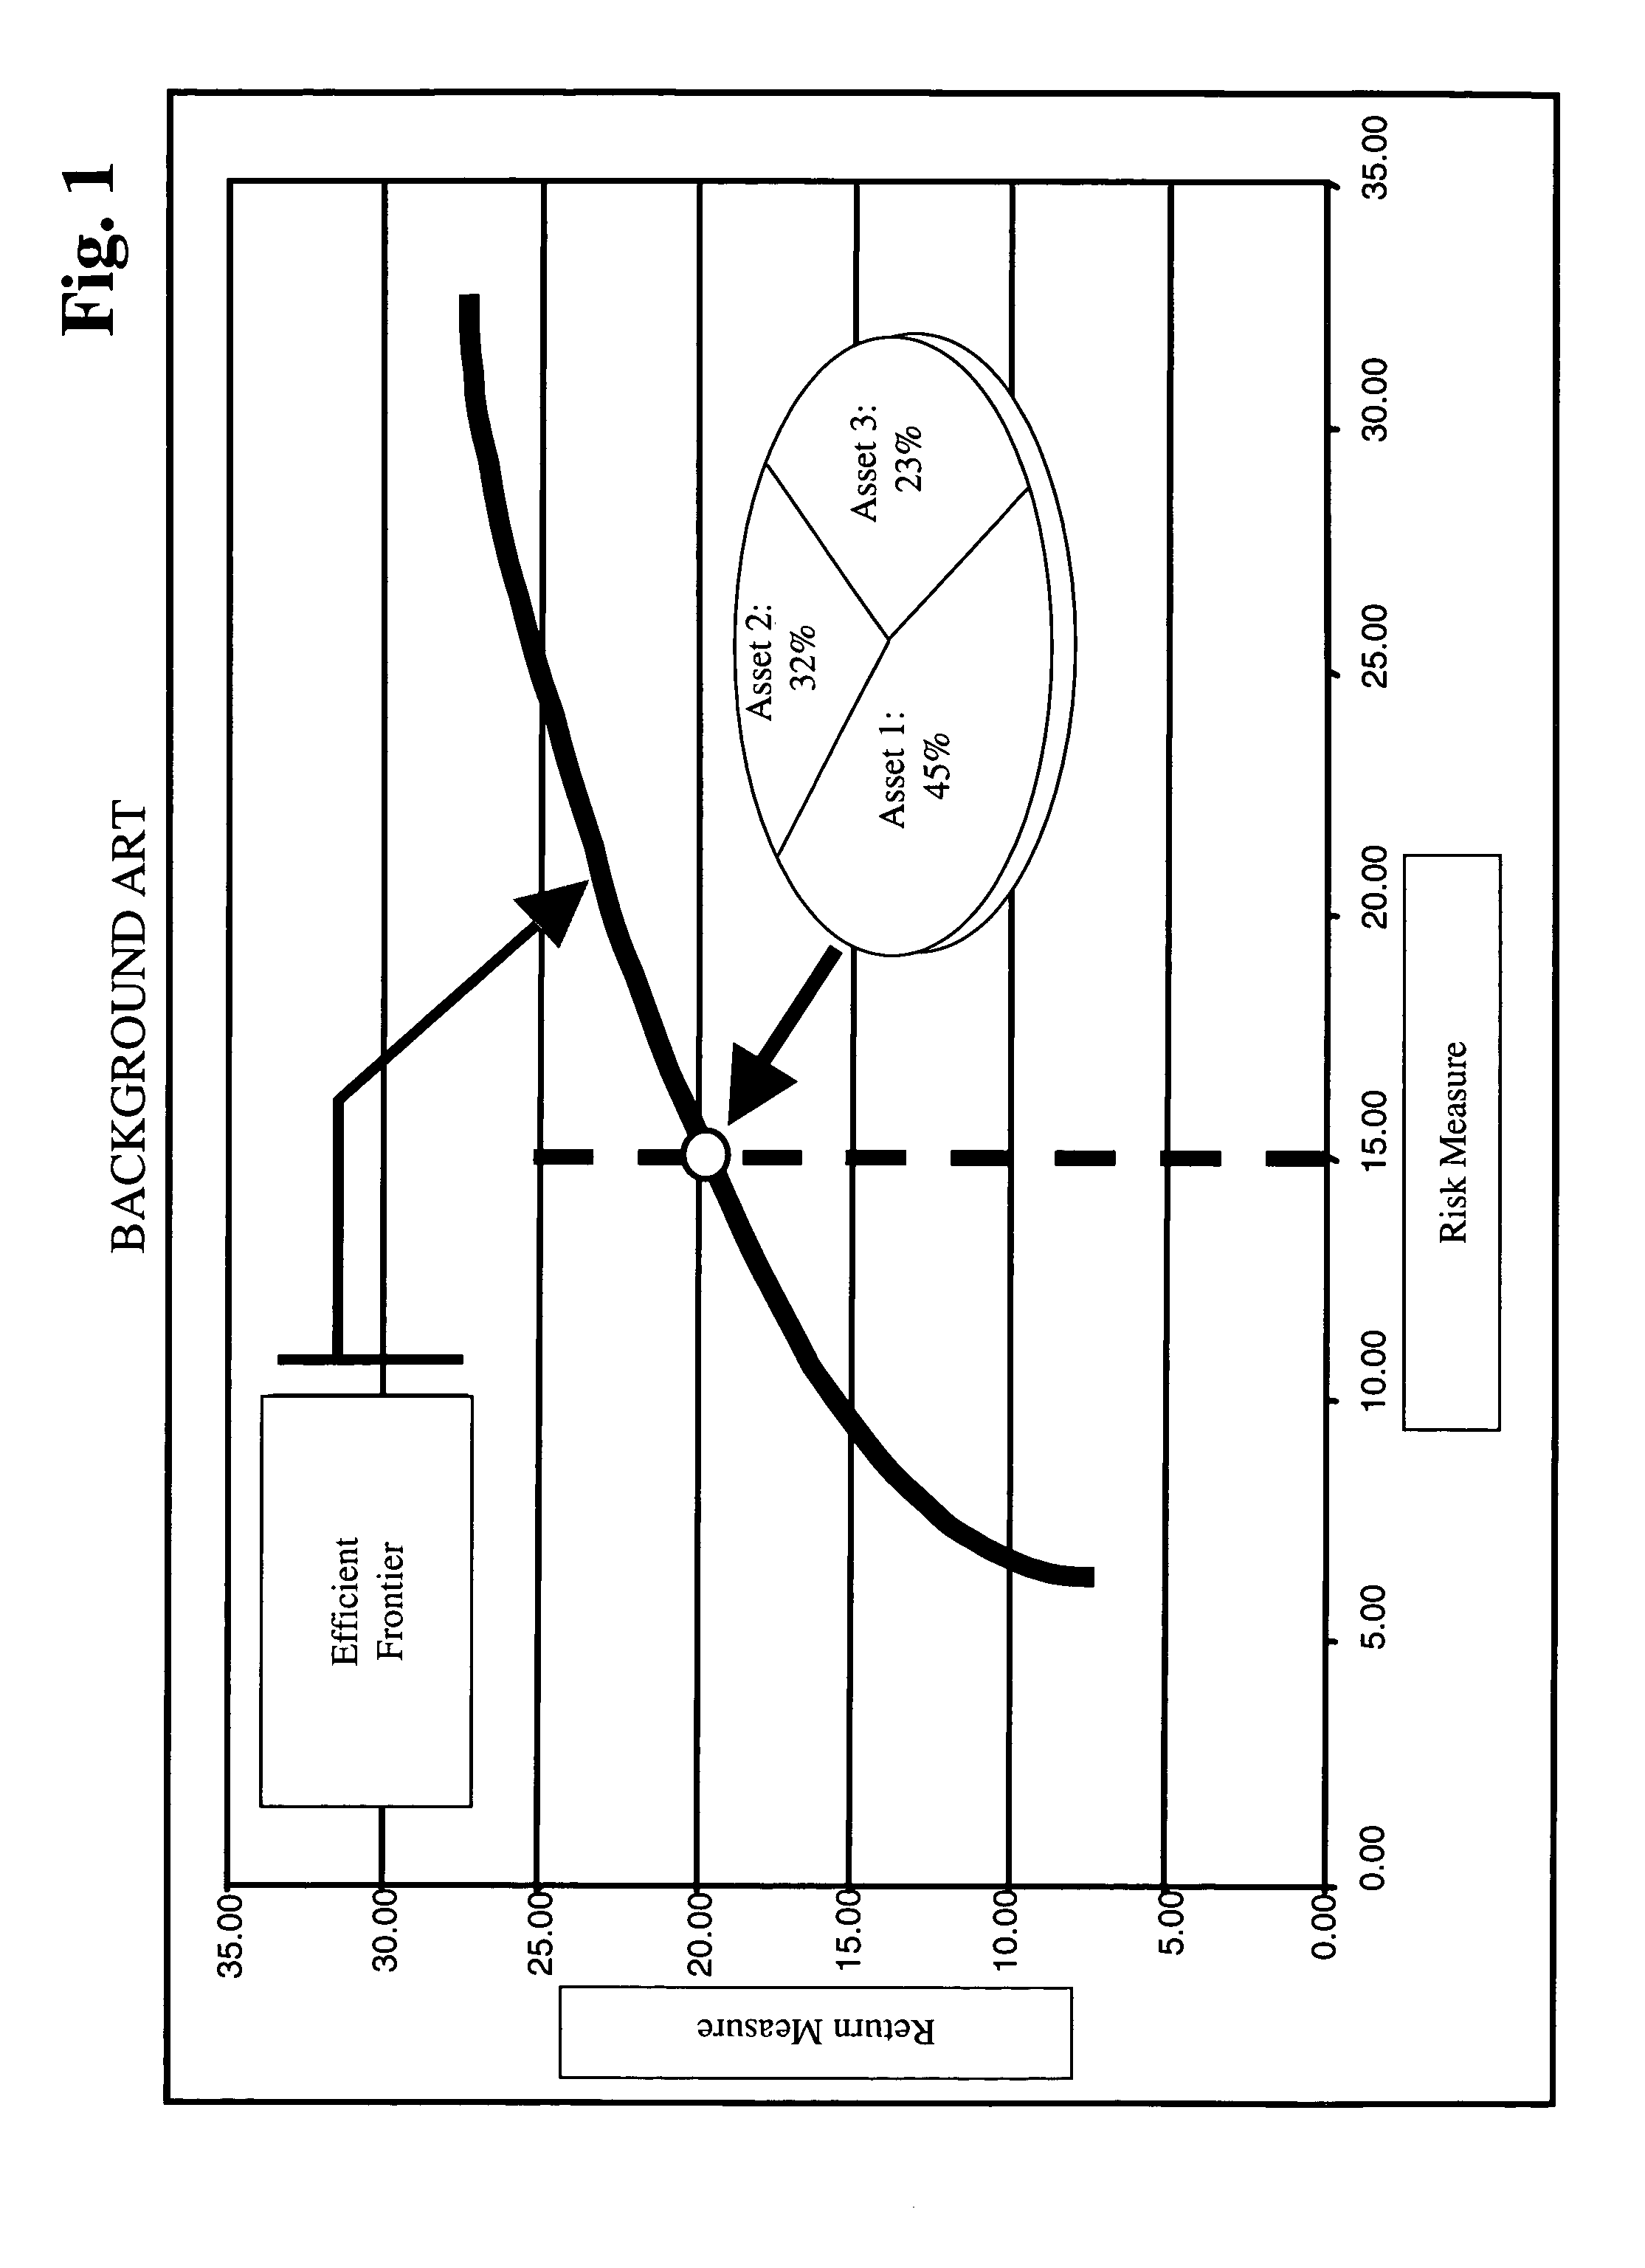 Systems and methods for multi-objective portfolio analysis using dominance filtering